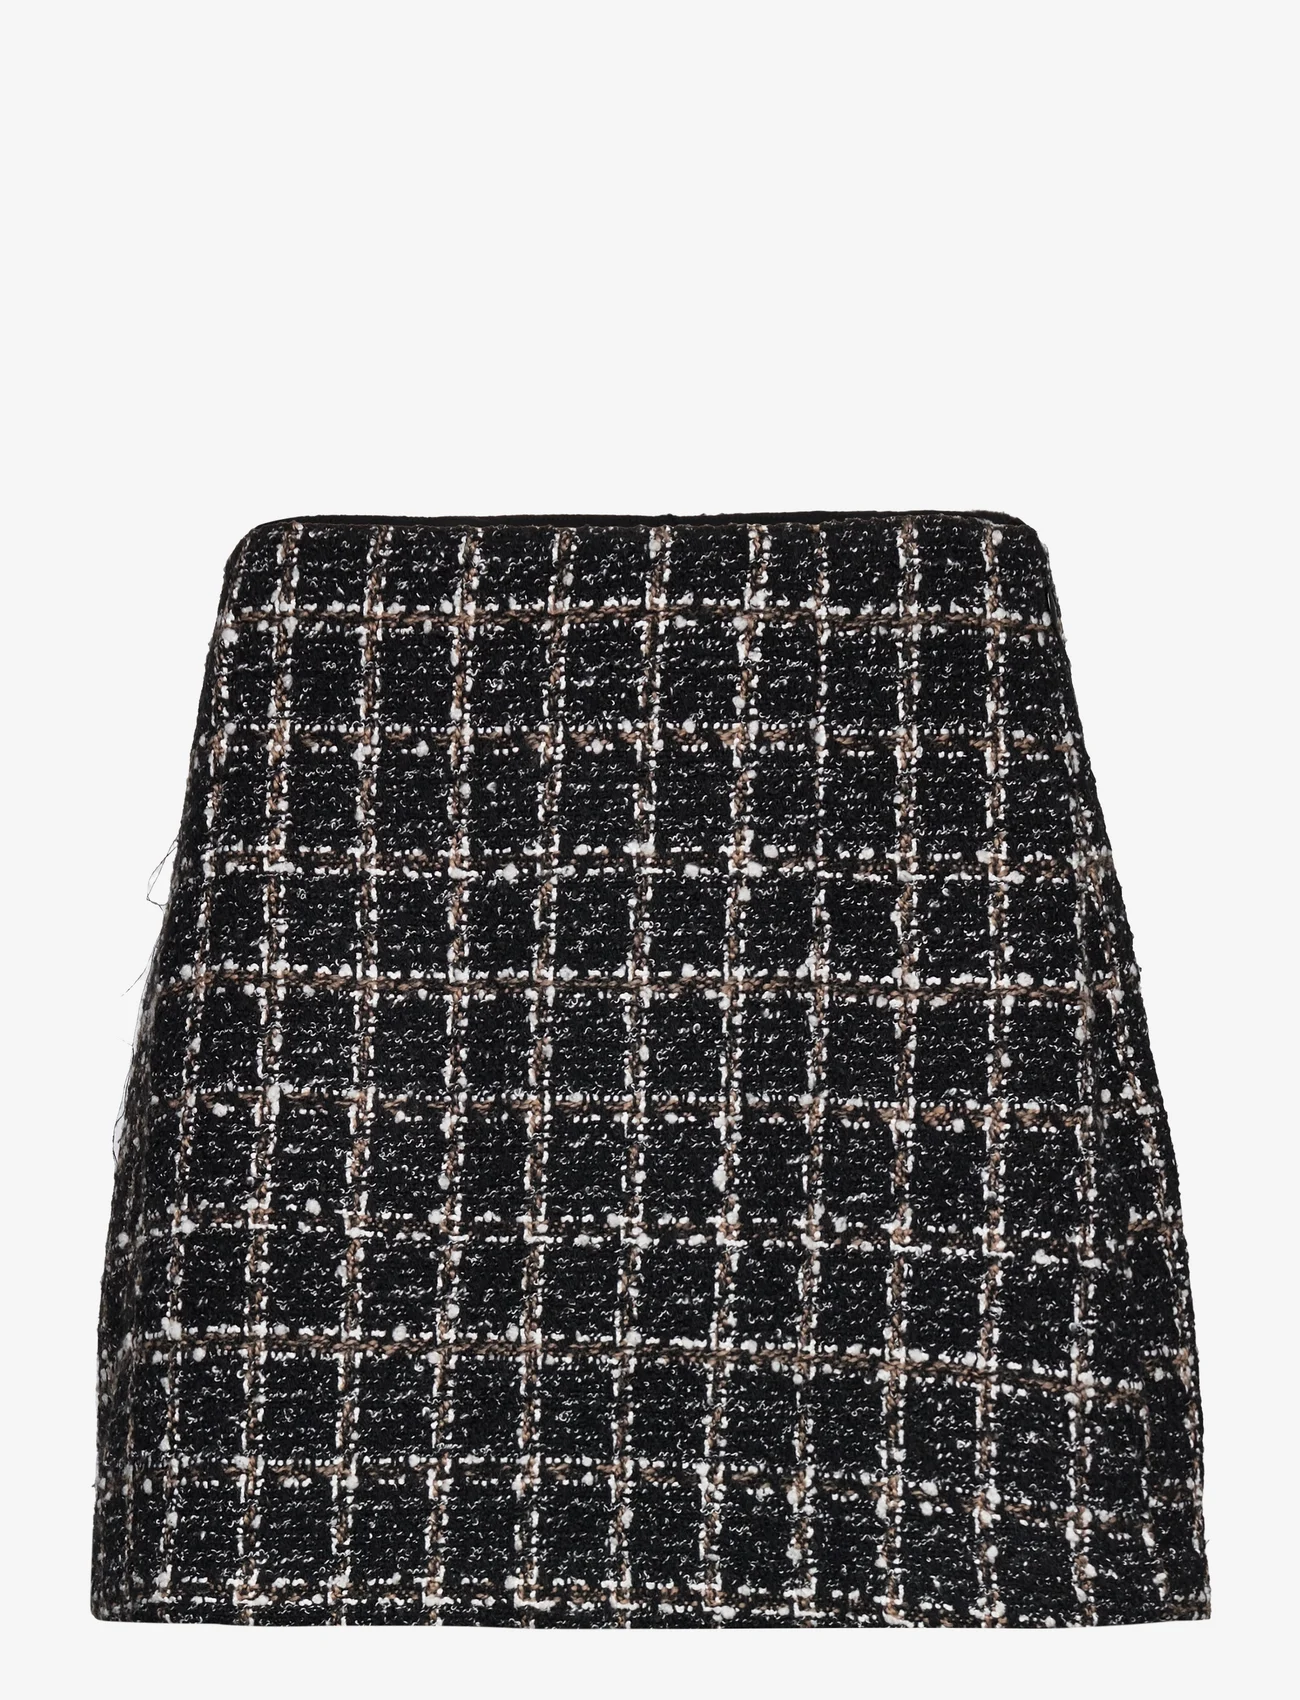 Abercrombie & Fitch - ANF WOMENS SKIRTS - korte rokken - black and white tweed - 0